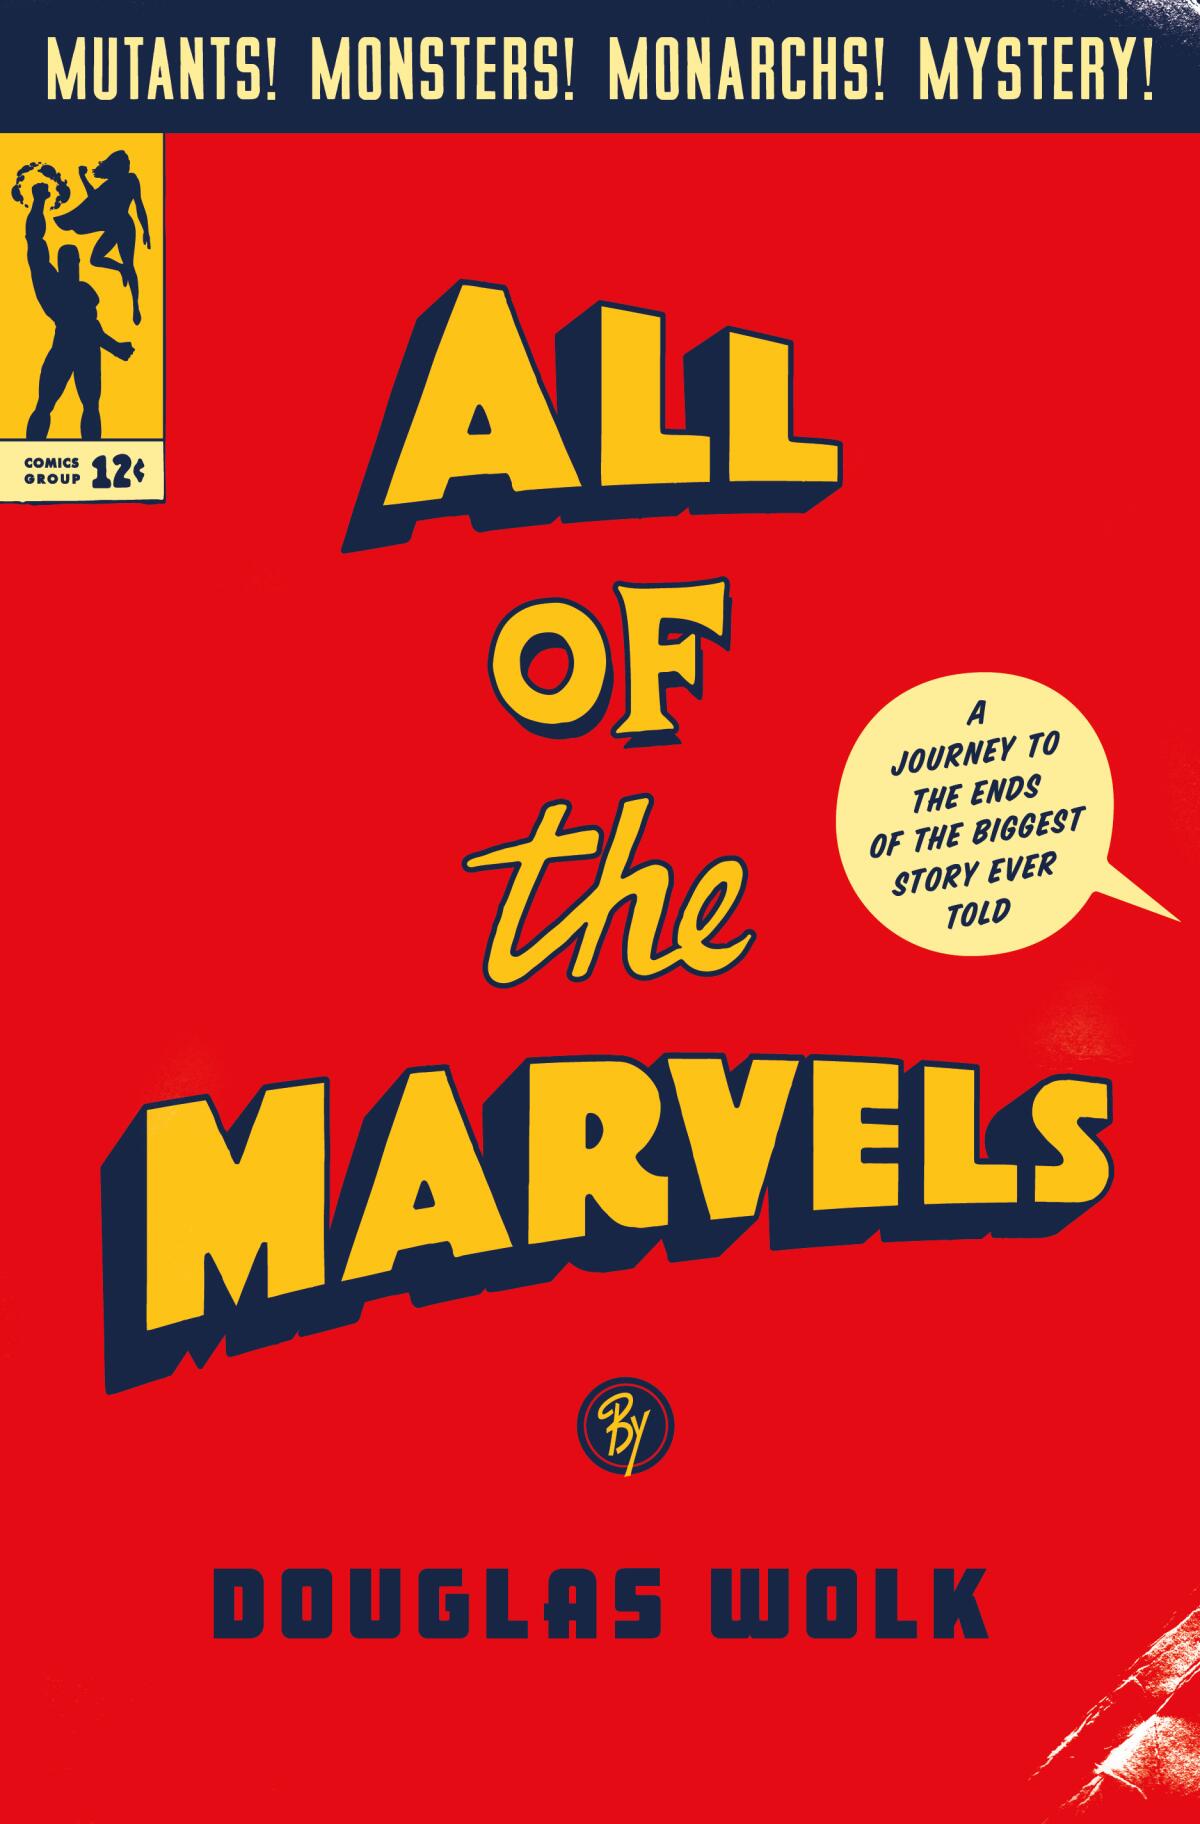 "All of the Marvels," by Douglas Wolk